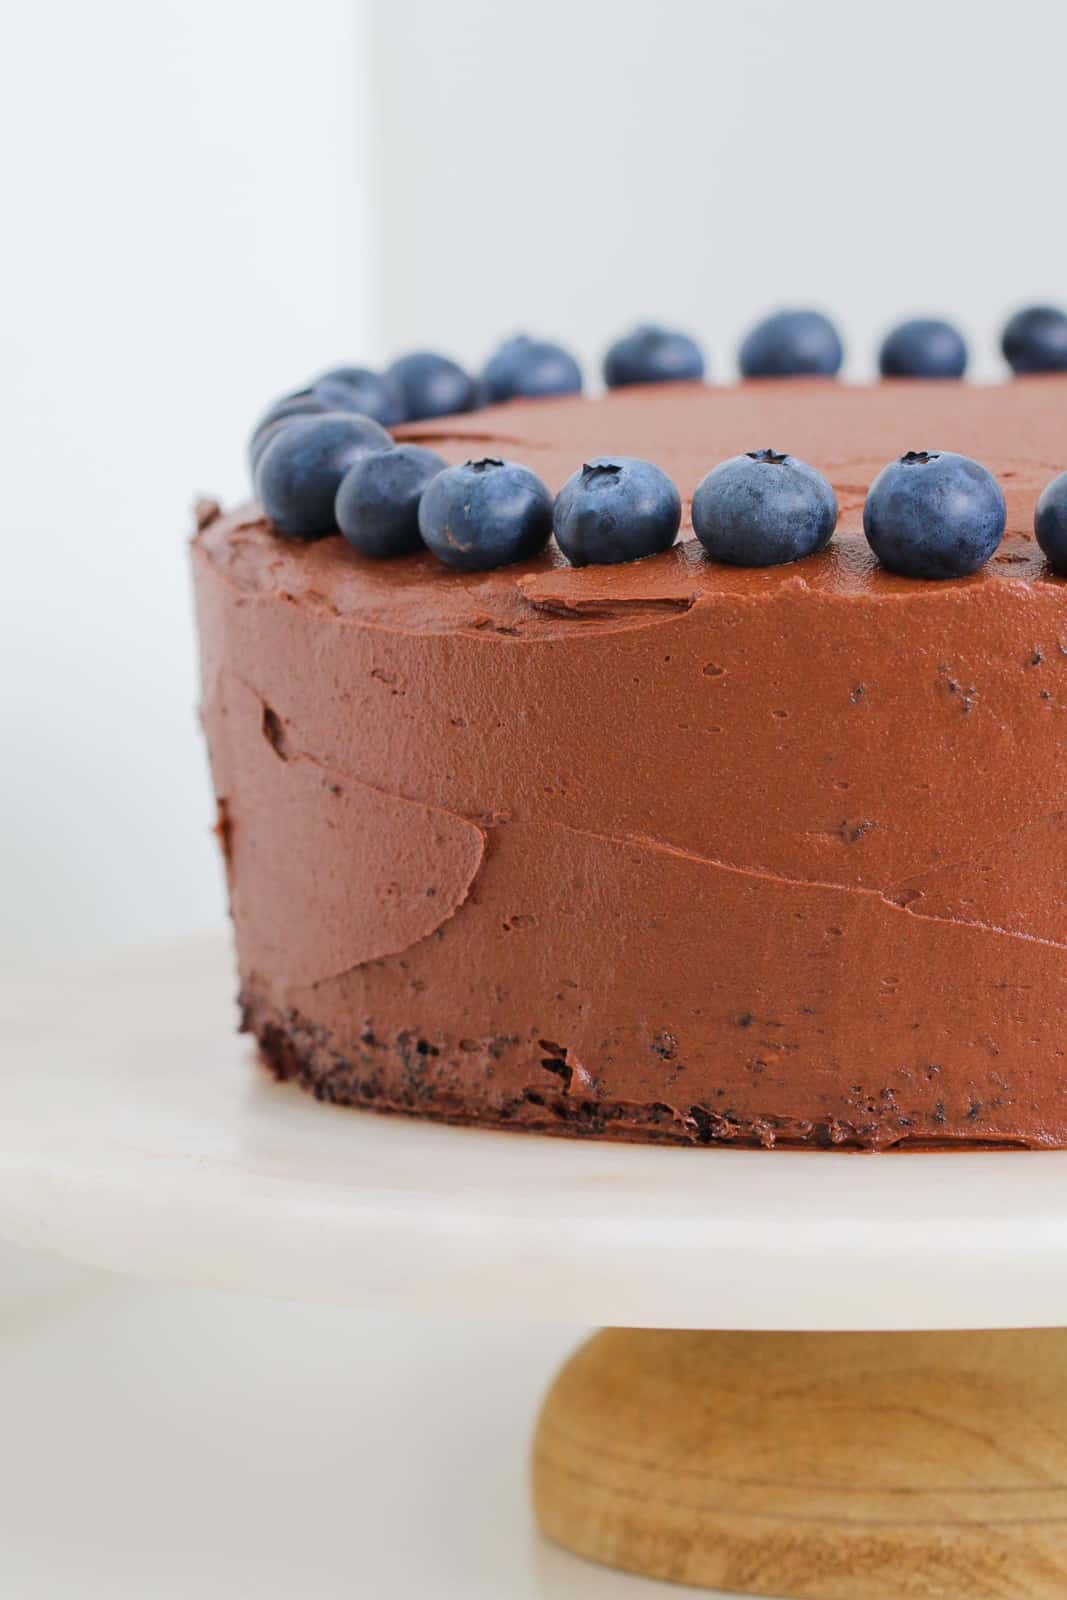 A chocolate frosted cake on a cake stand decorated with blueberries.